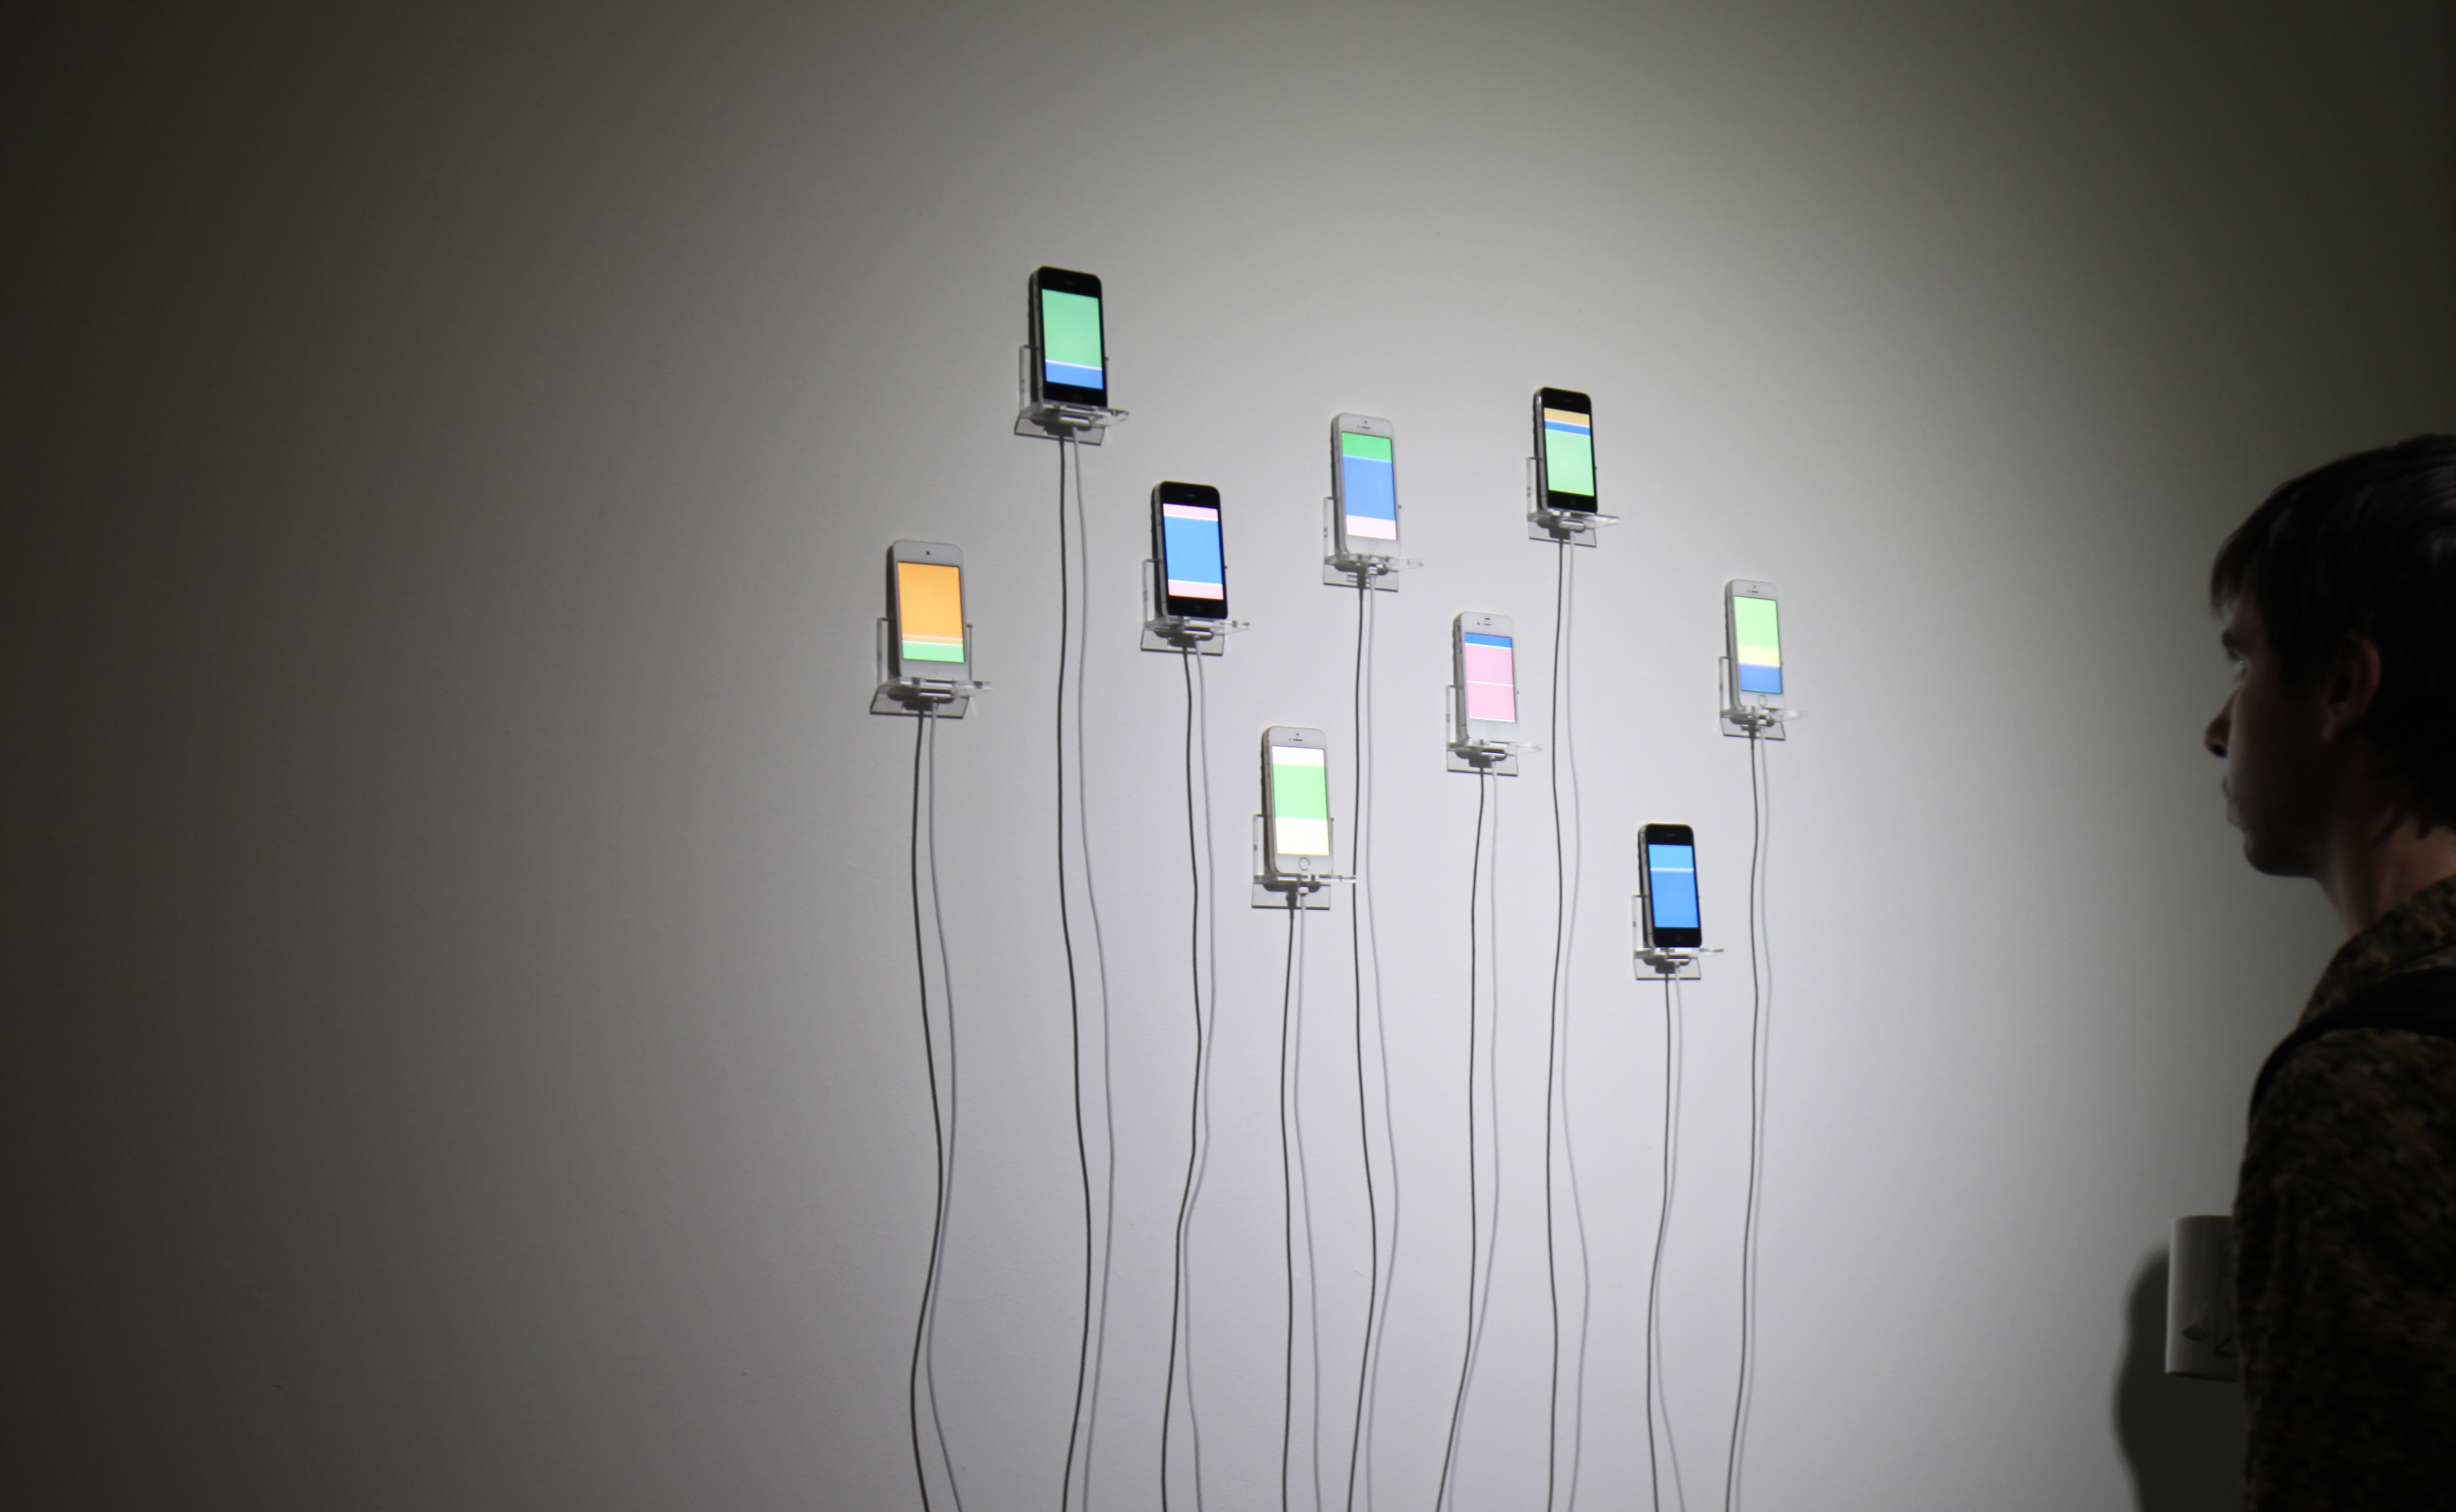 Man observes the iPhones in Infinite Scroll mounted on the wall, each scrolling bright colors